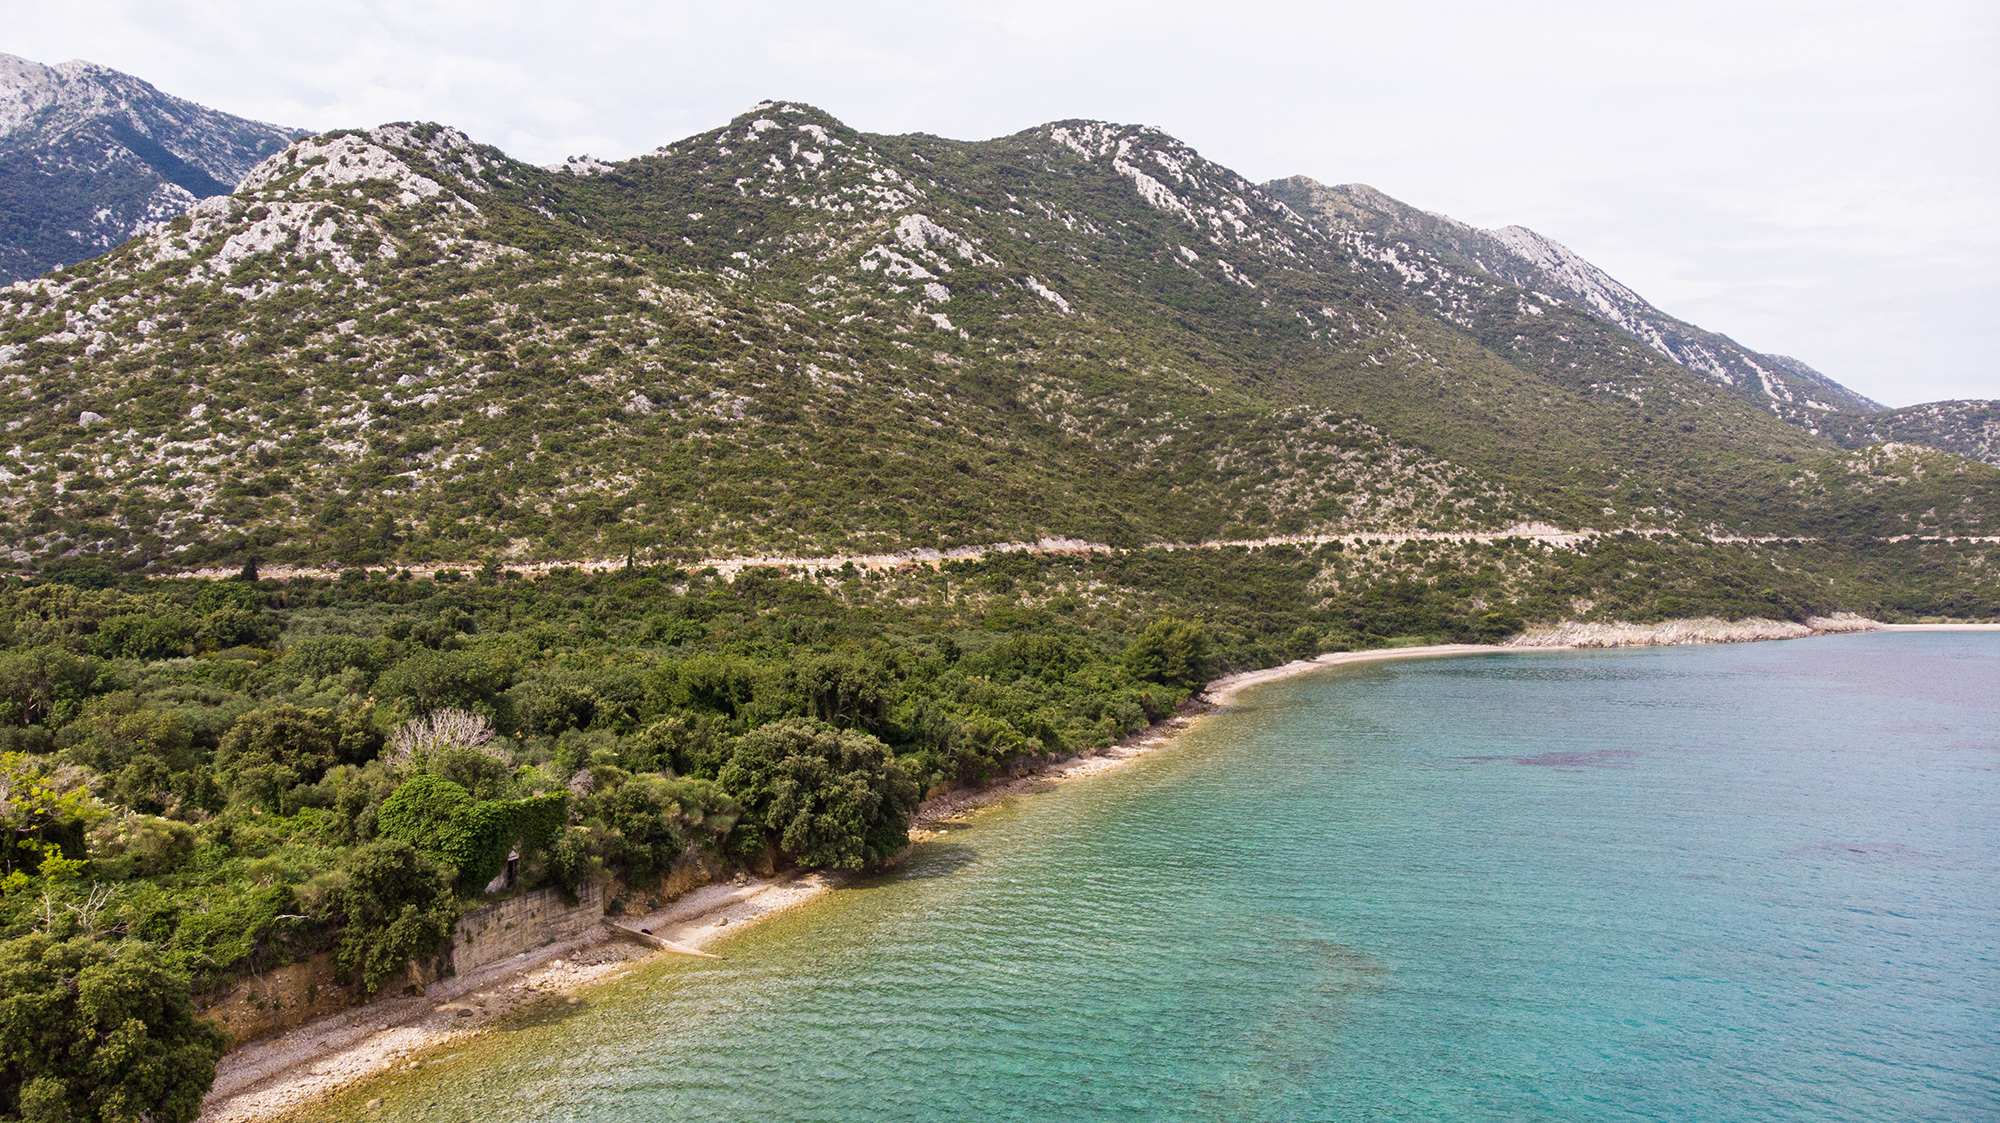 Adriatic Sea and mountains from drone view